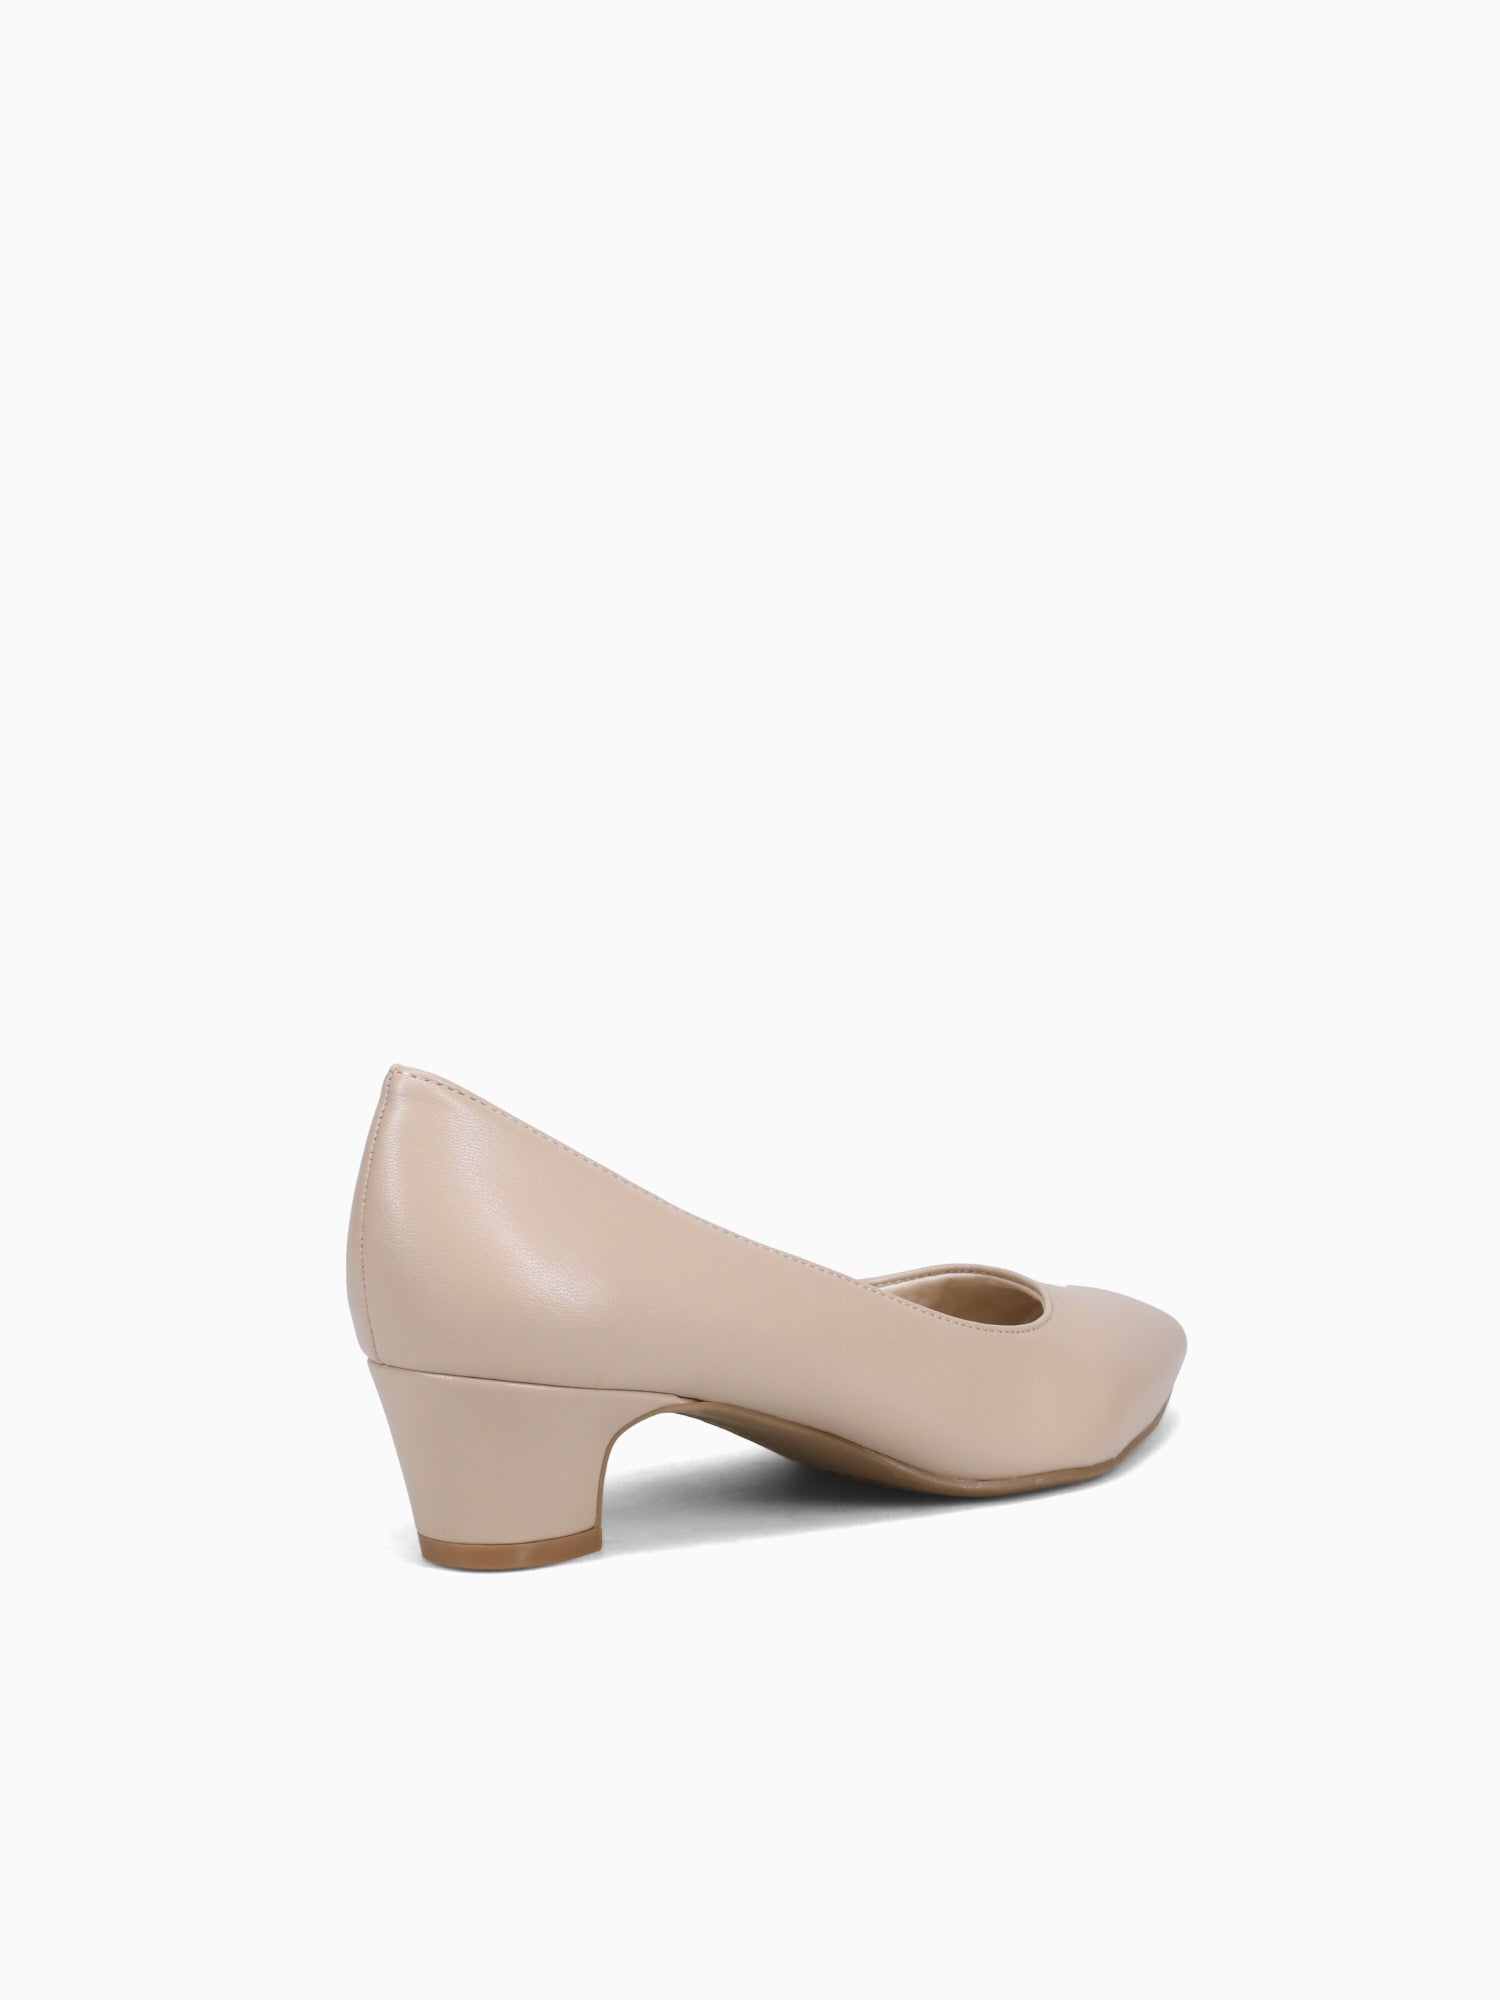 Minx Tender Taupe Taupe / 5 / M